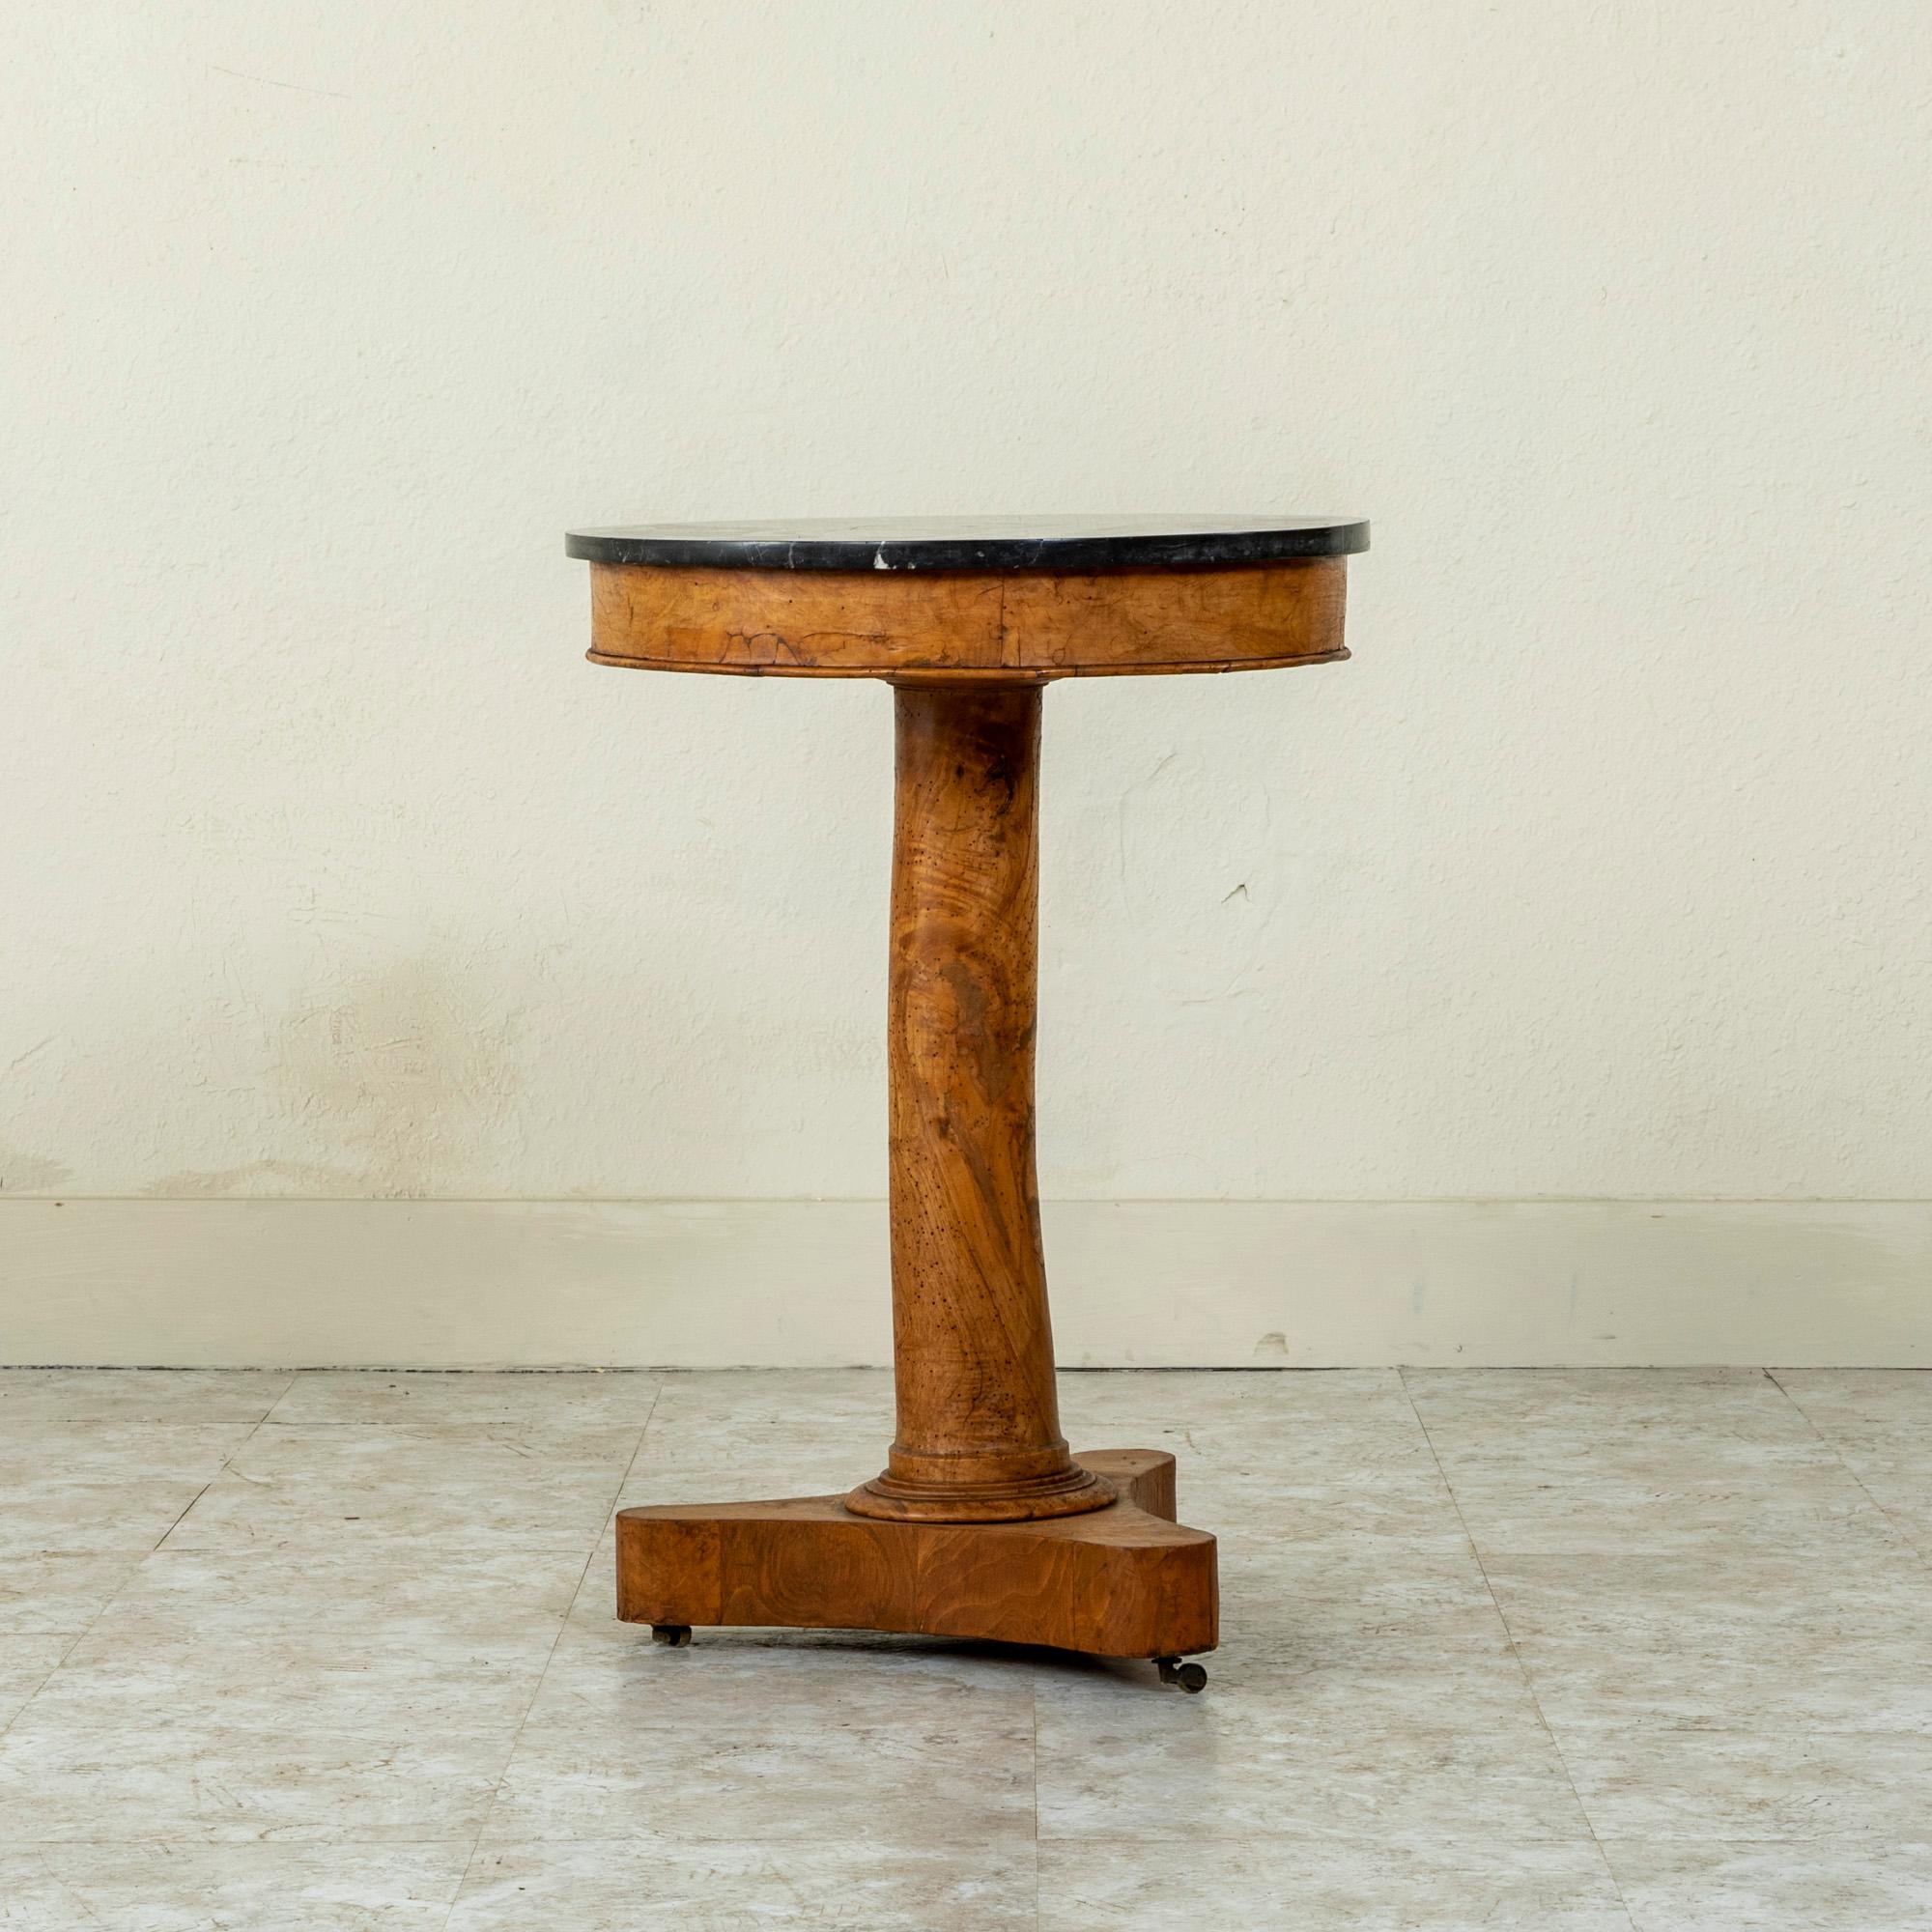 Marble Early 19th Century French Empire Period Burl Walnut Gueridon or Pedestal Table